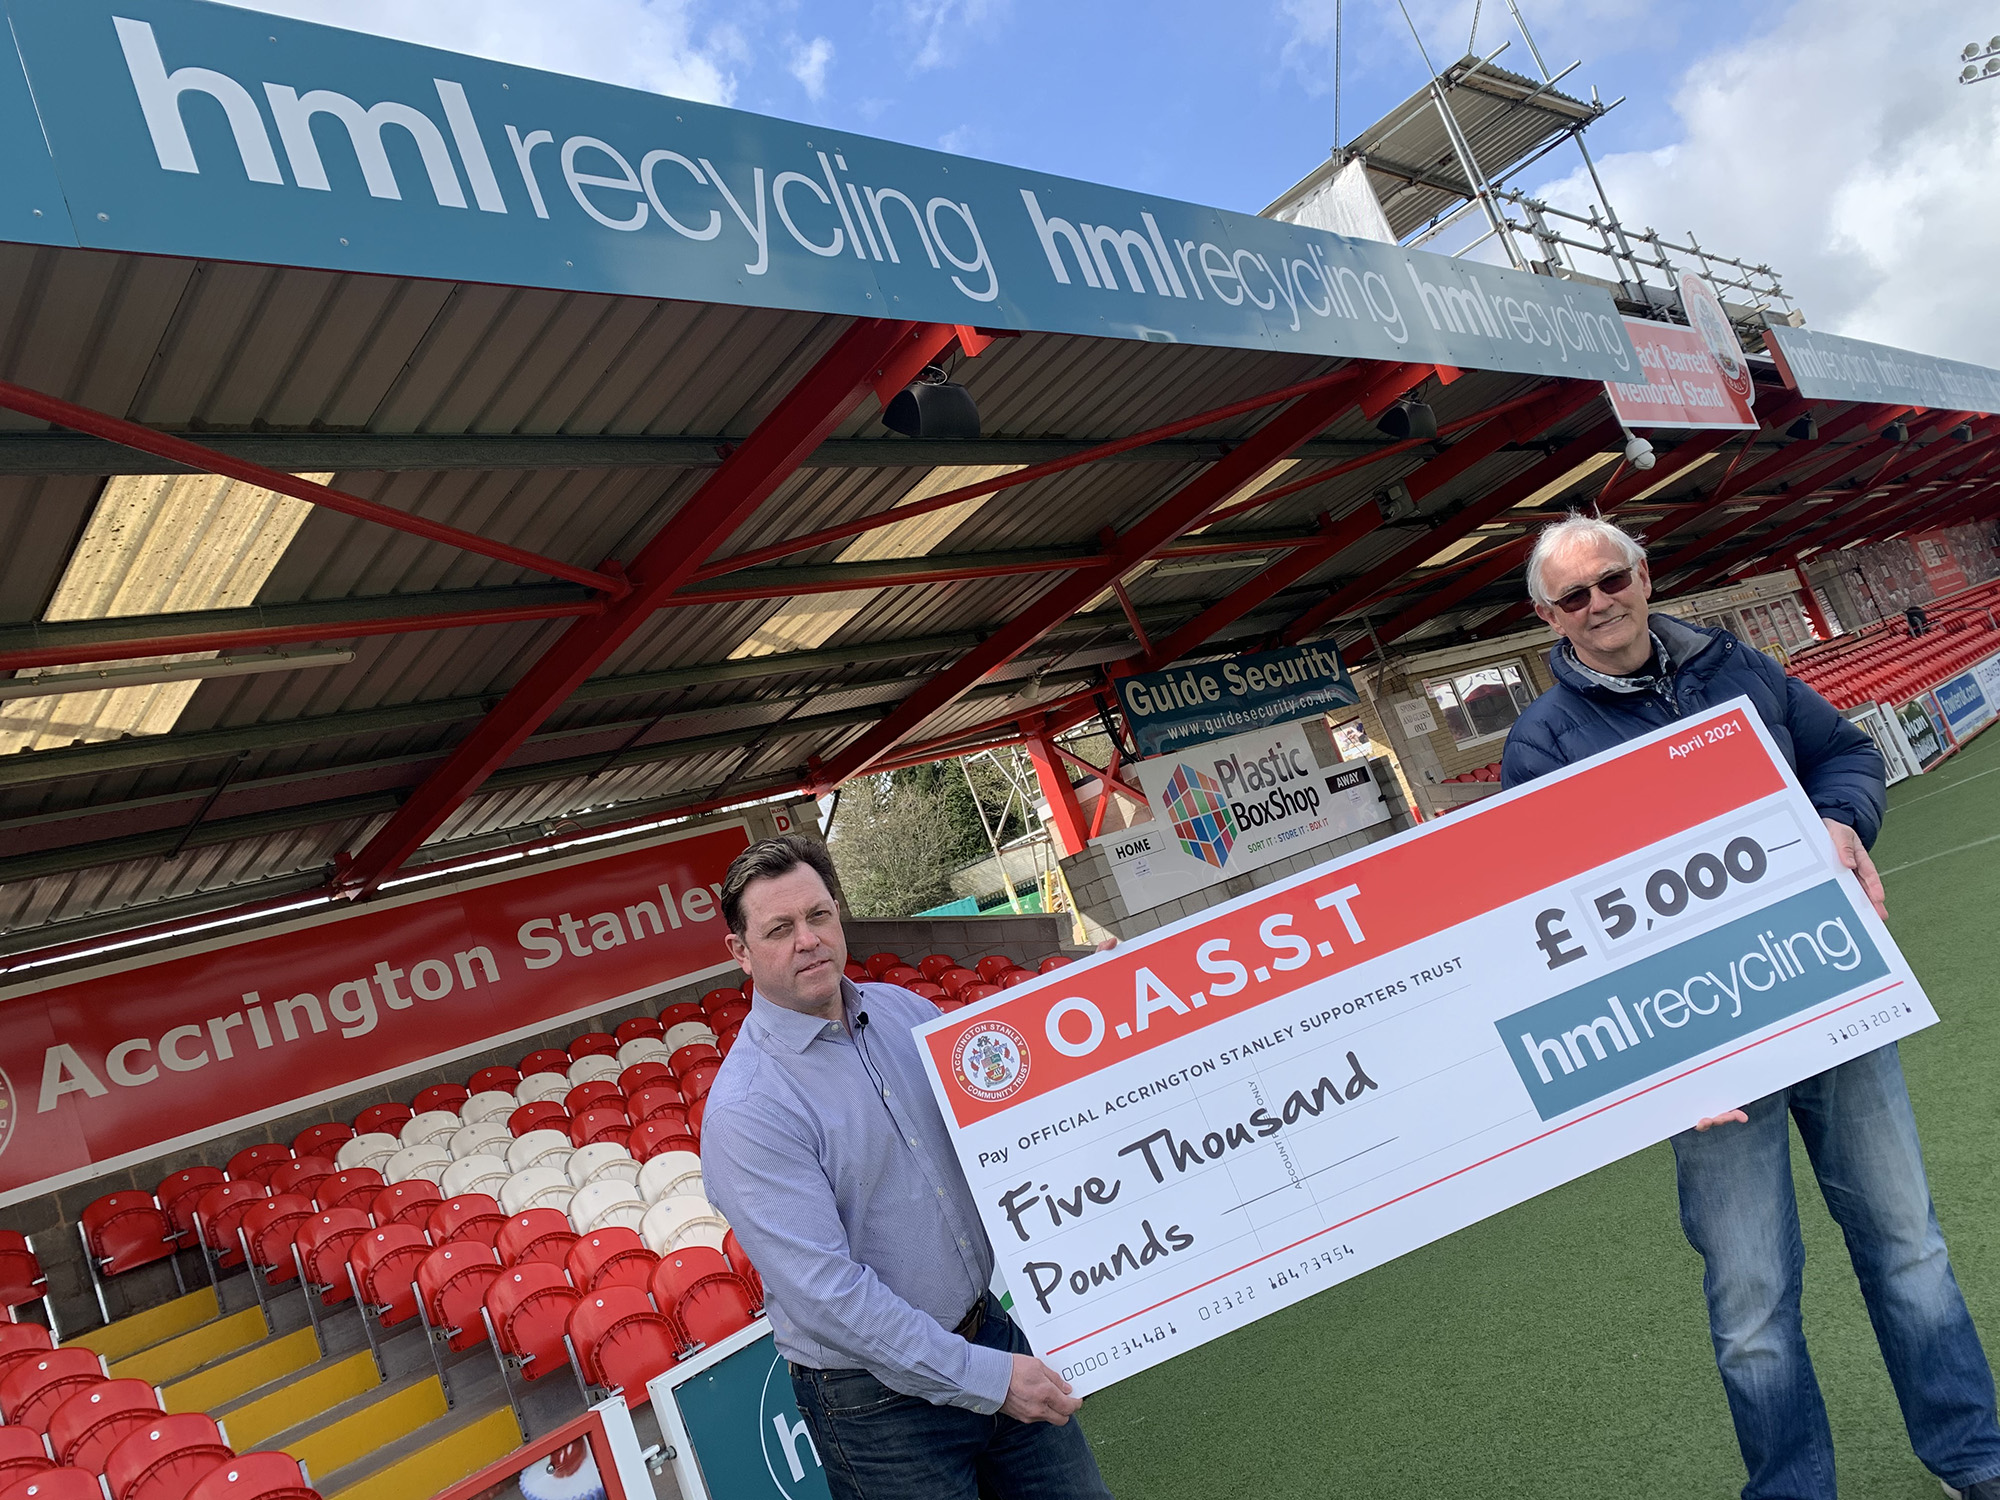 HML RECYCLING DONATE A GENEROUS £5000 TO THE OFFICIAL ACCRINGTON STANLEY SUPPORTERS TRUST